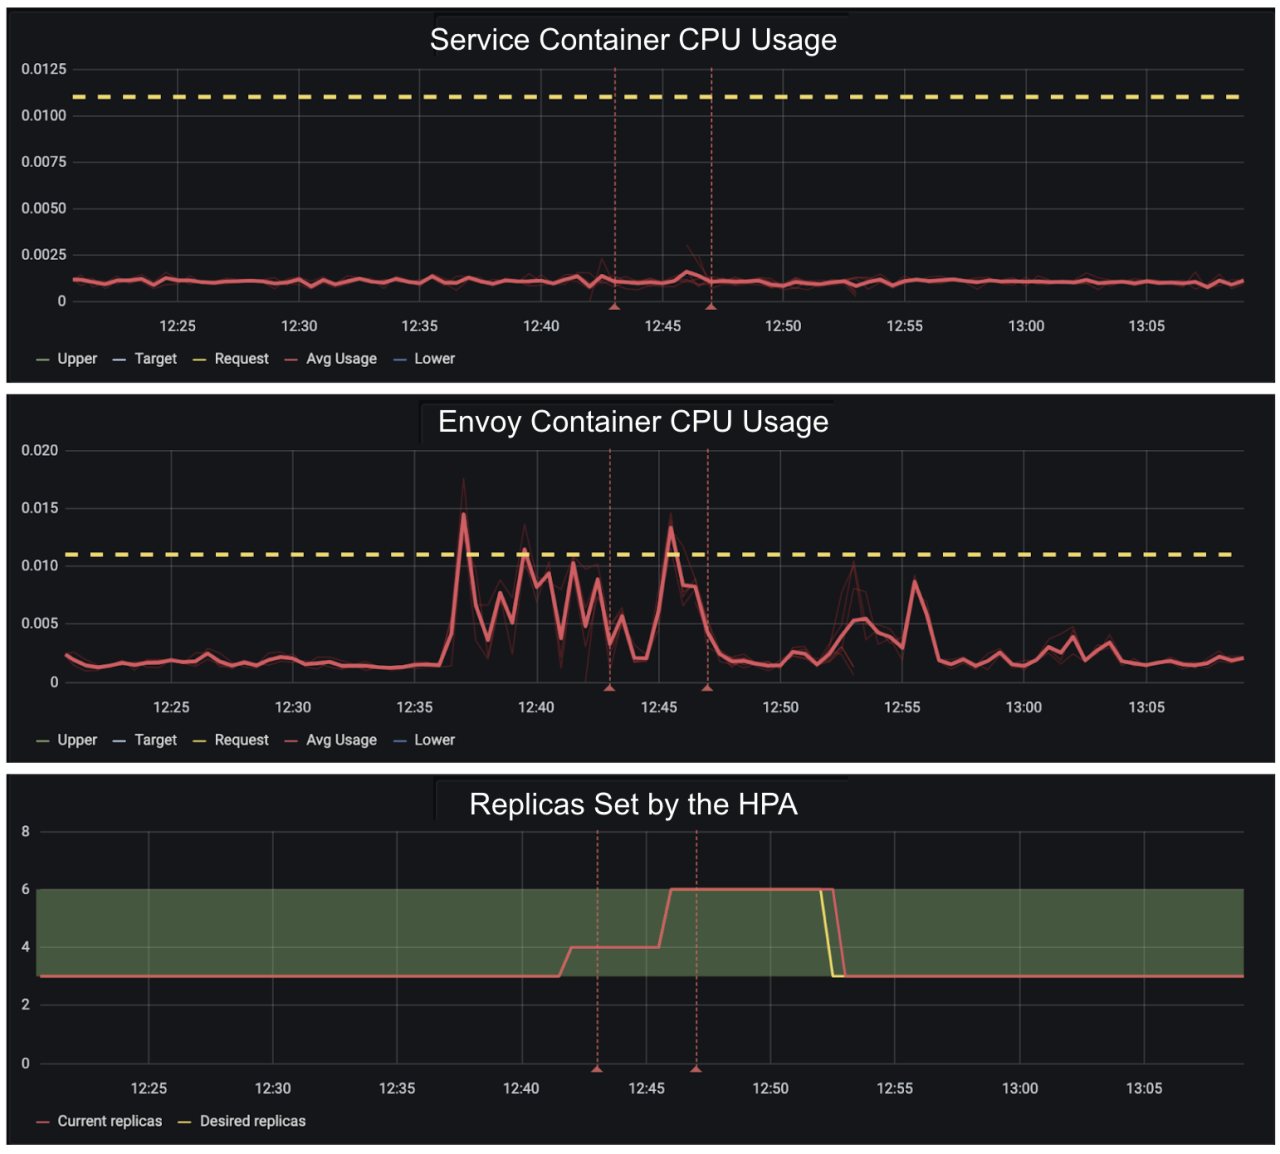 A graph showing Service Container CPU Usage, Envoy Container CPU usage, and Replicas Set by the HPA